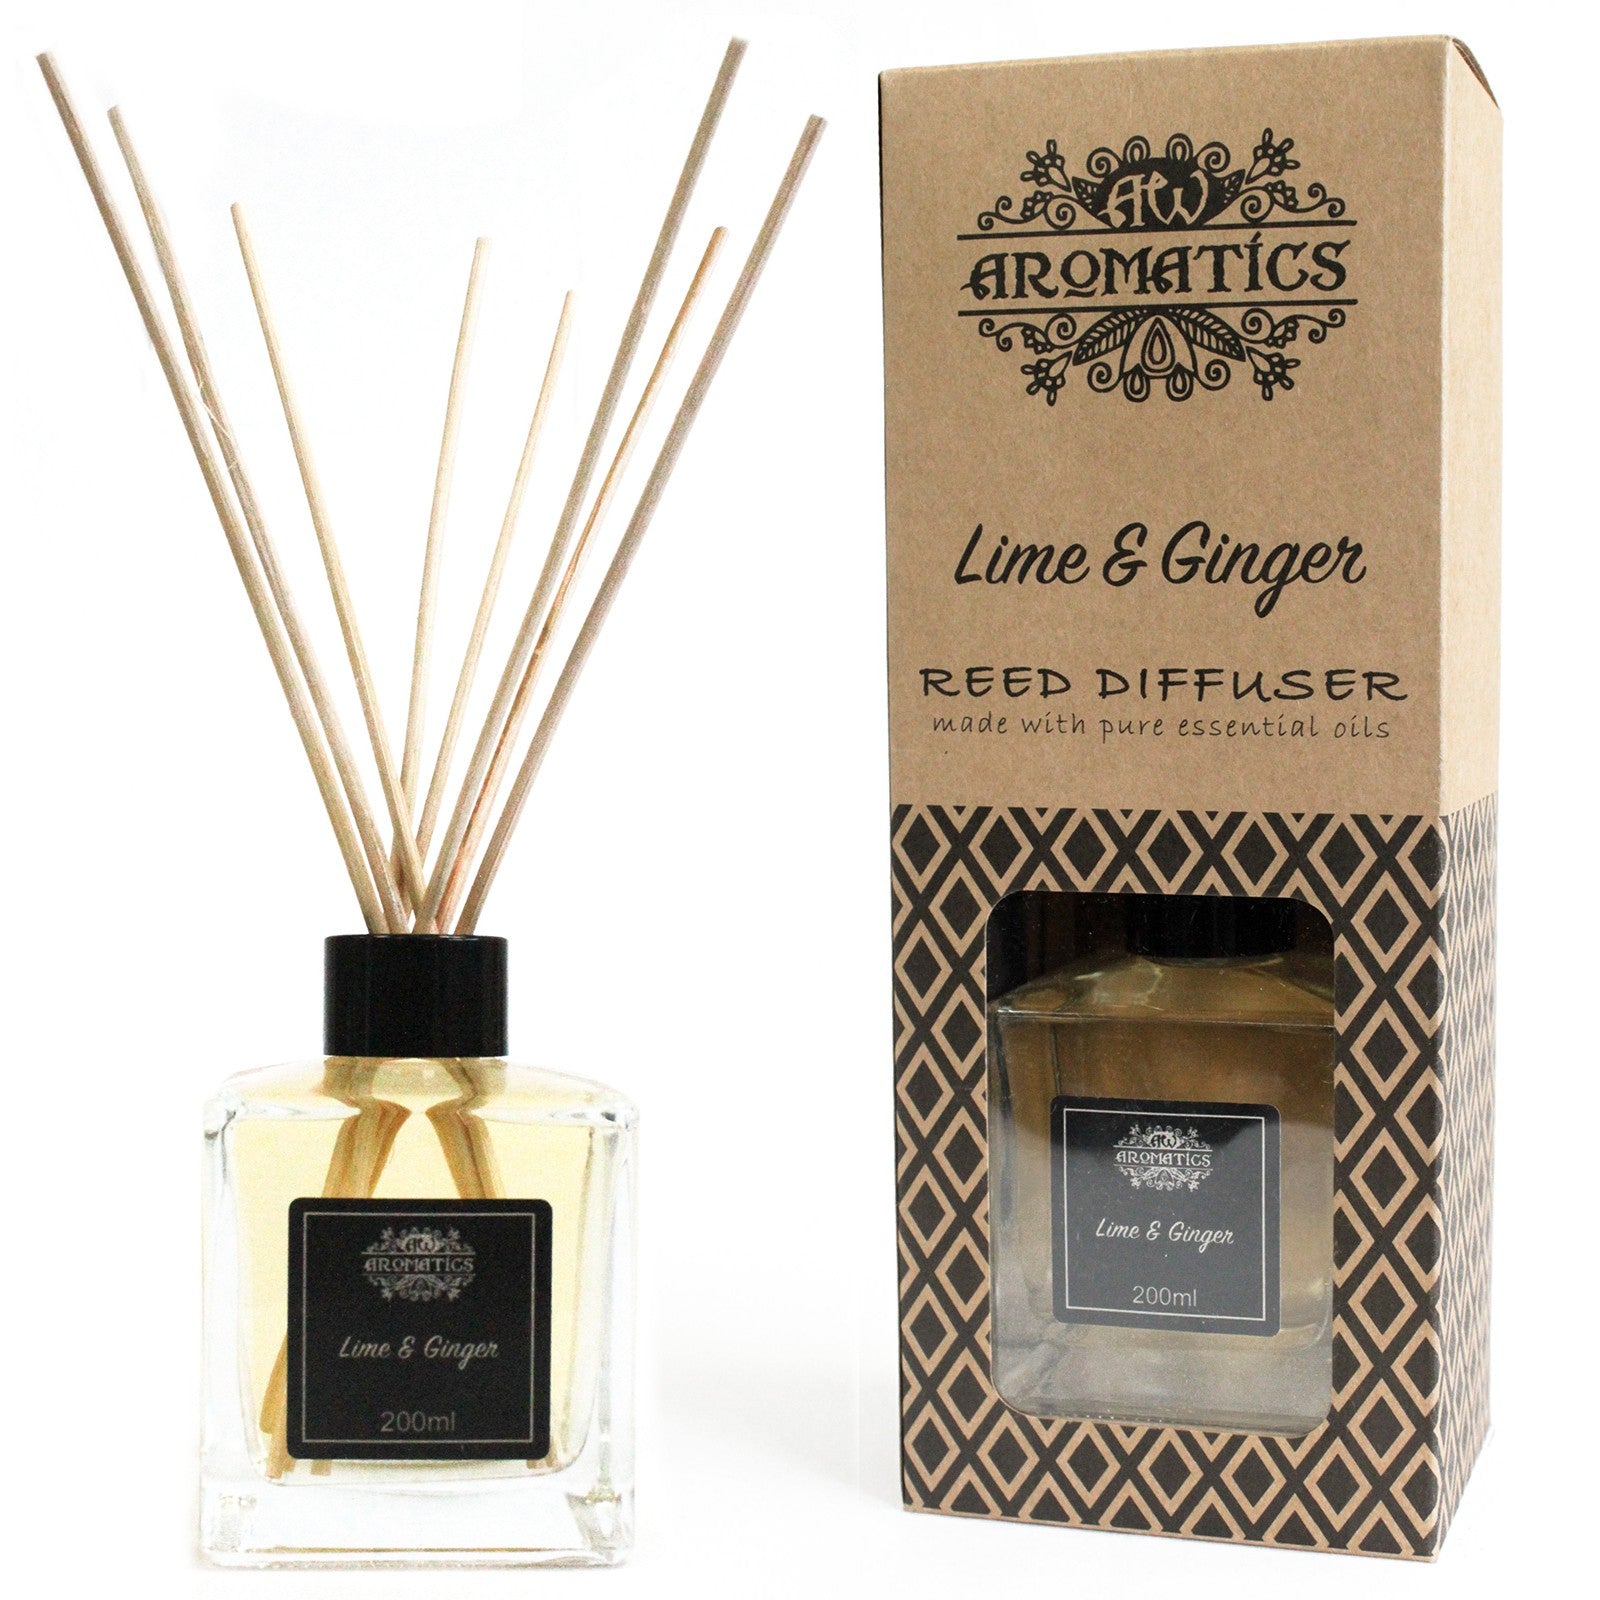 View 200ml Lime Ginger Essential Oil Reed Diffuser information